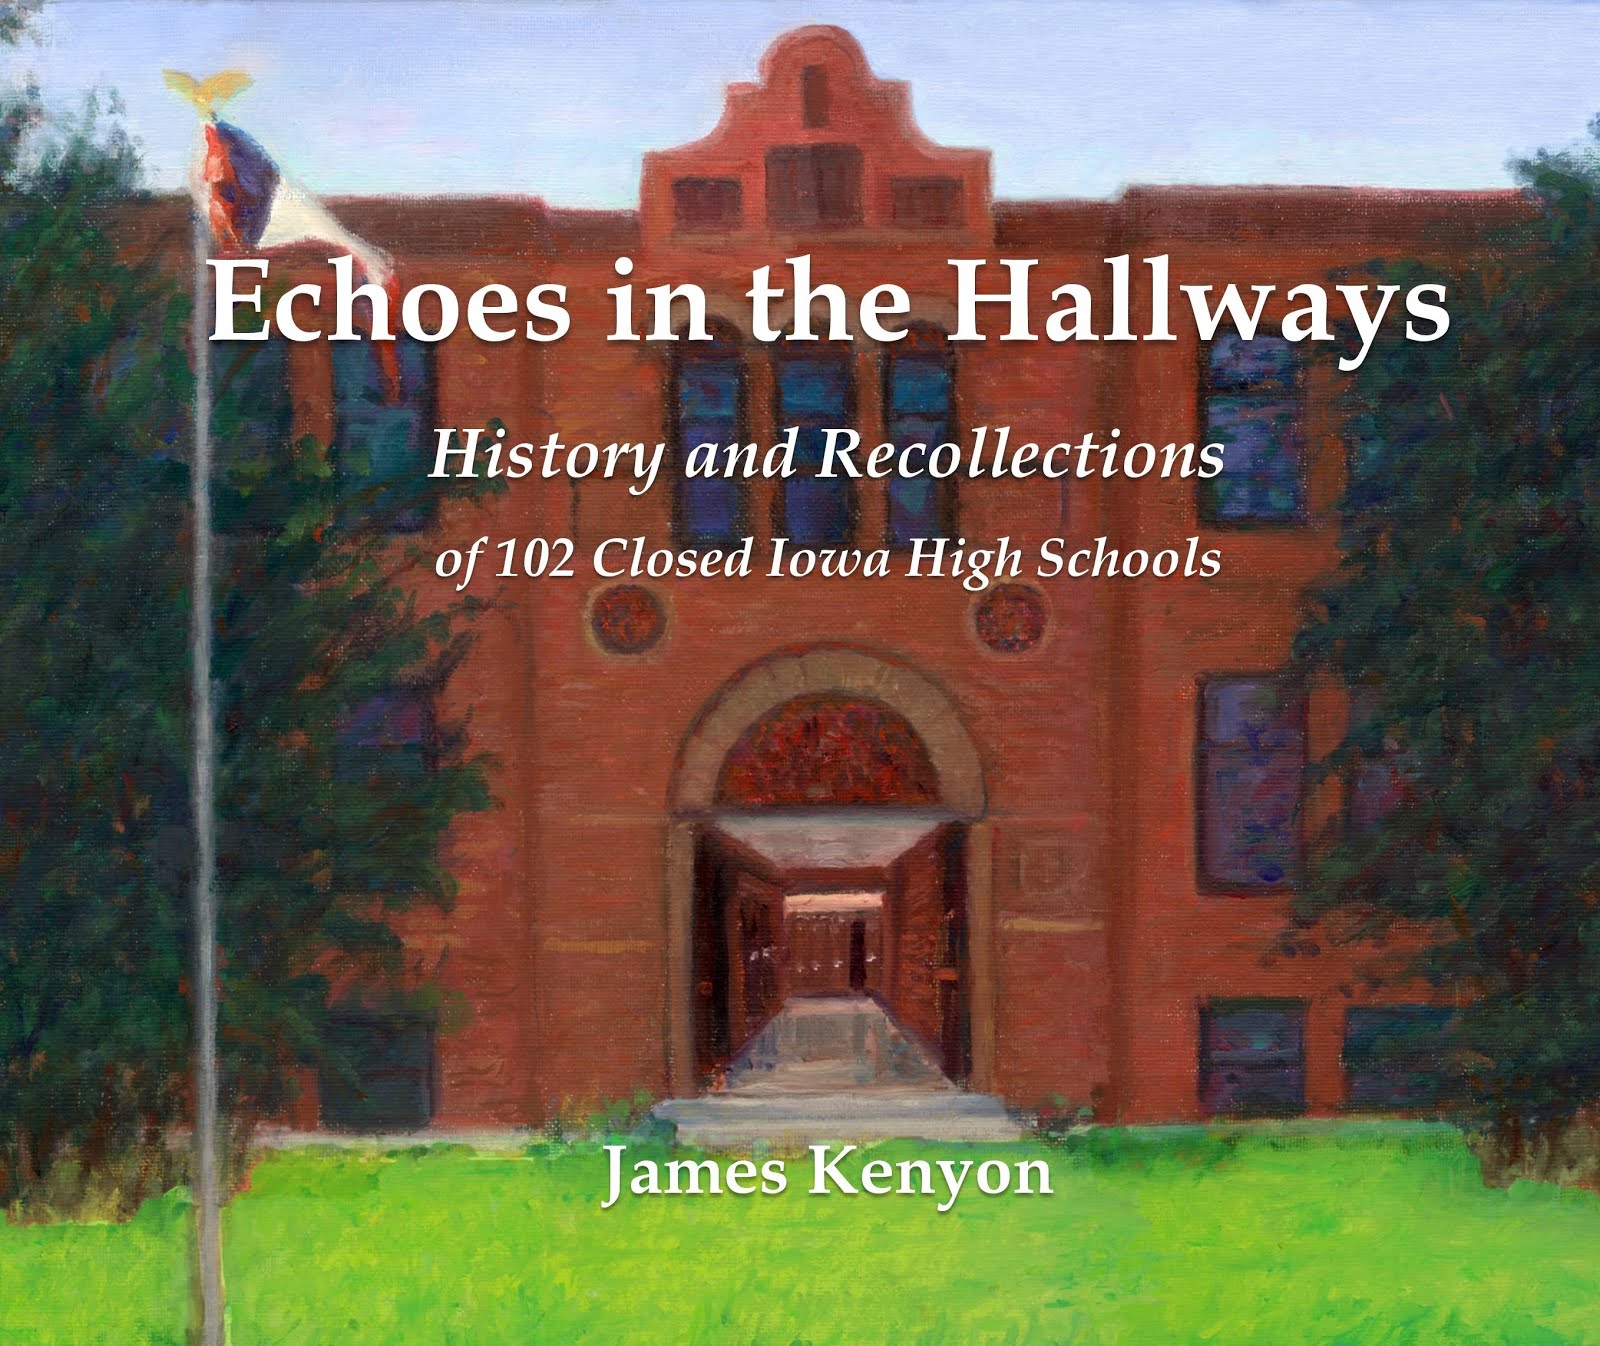 Echoes in the Hallways: History and Recollections of 102 Closed Iowa High Schools